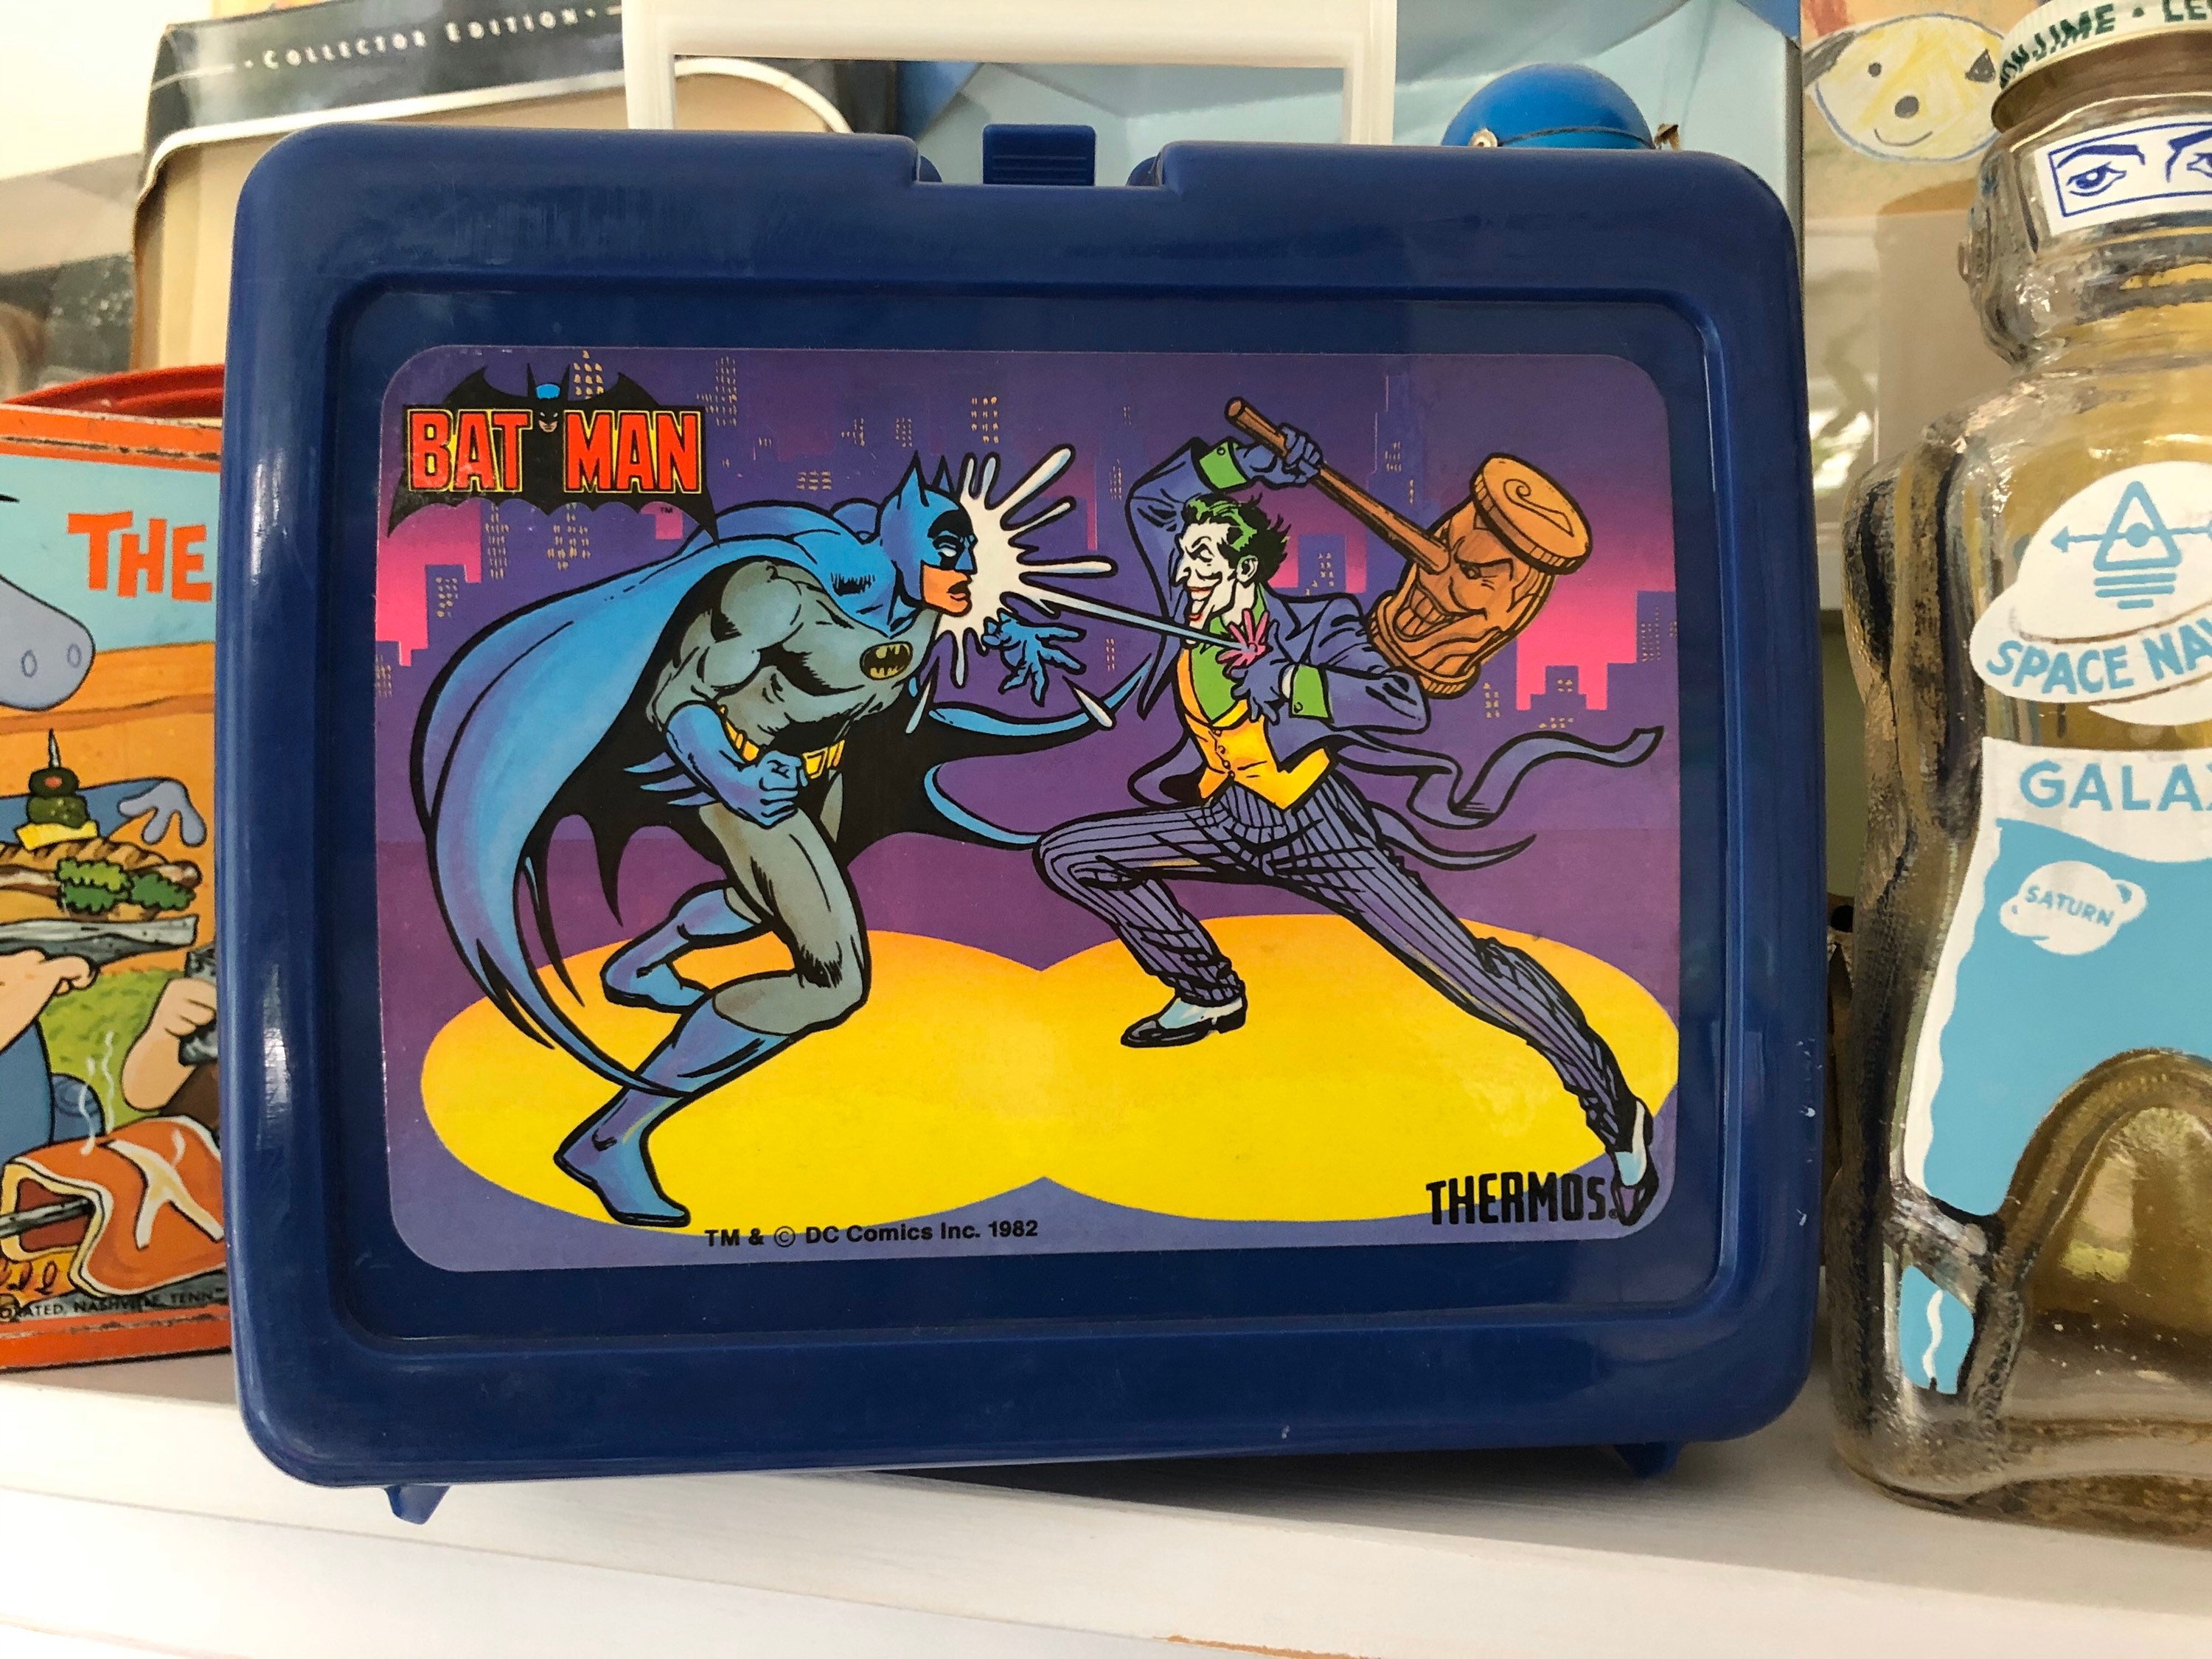 Vintage Plastic Batman Lunch Box and Matching Thermos. 